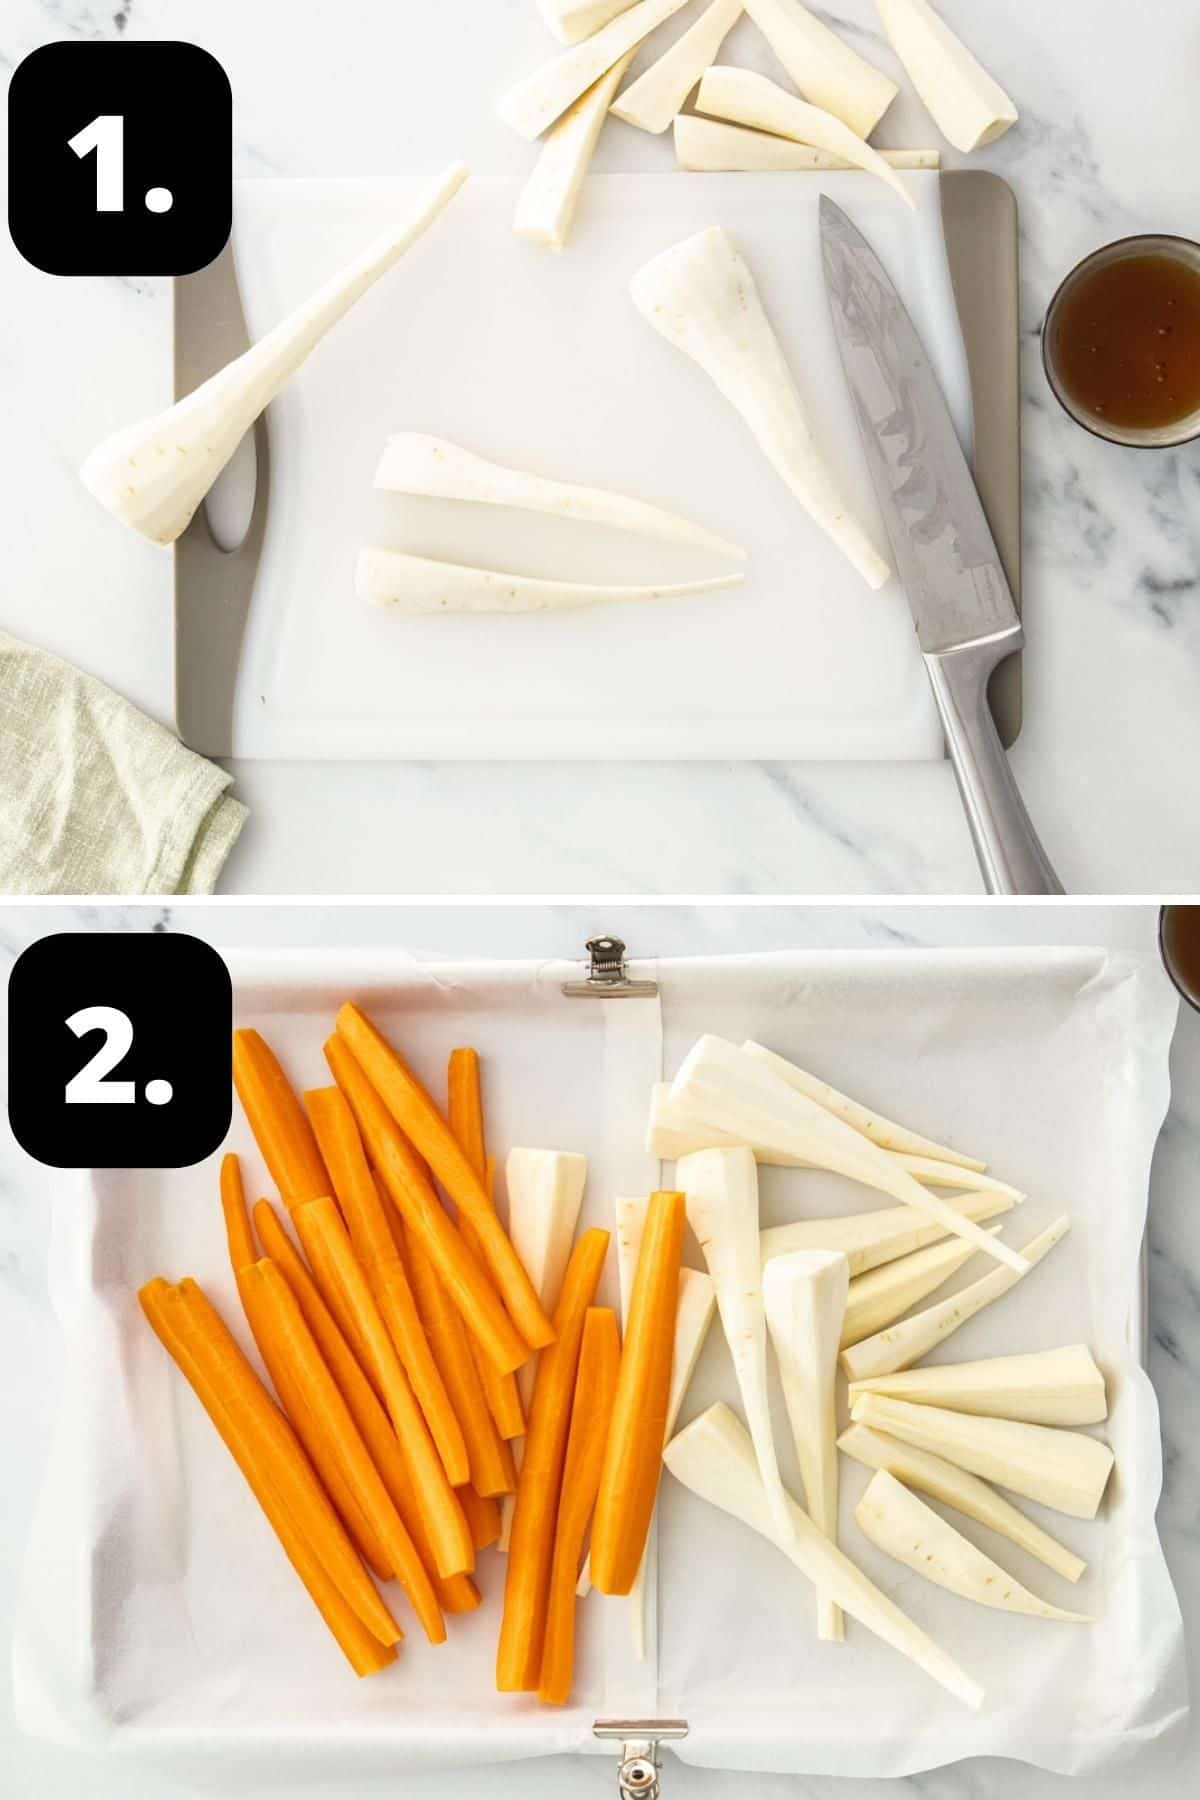 Steps 1-2 of preparing this recipe - cutting the parsnips and adding the cut vegetables to a baking tray.